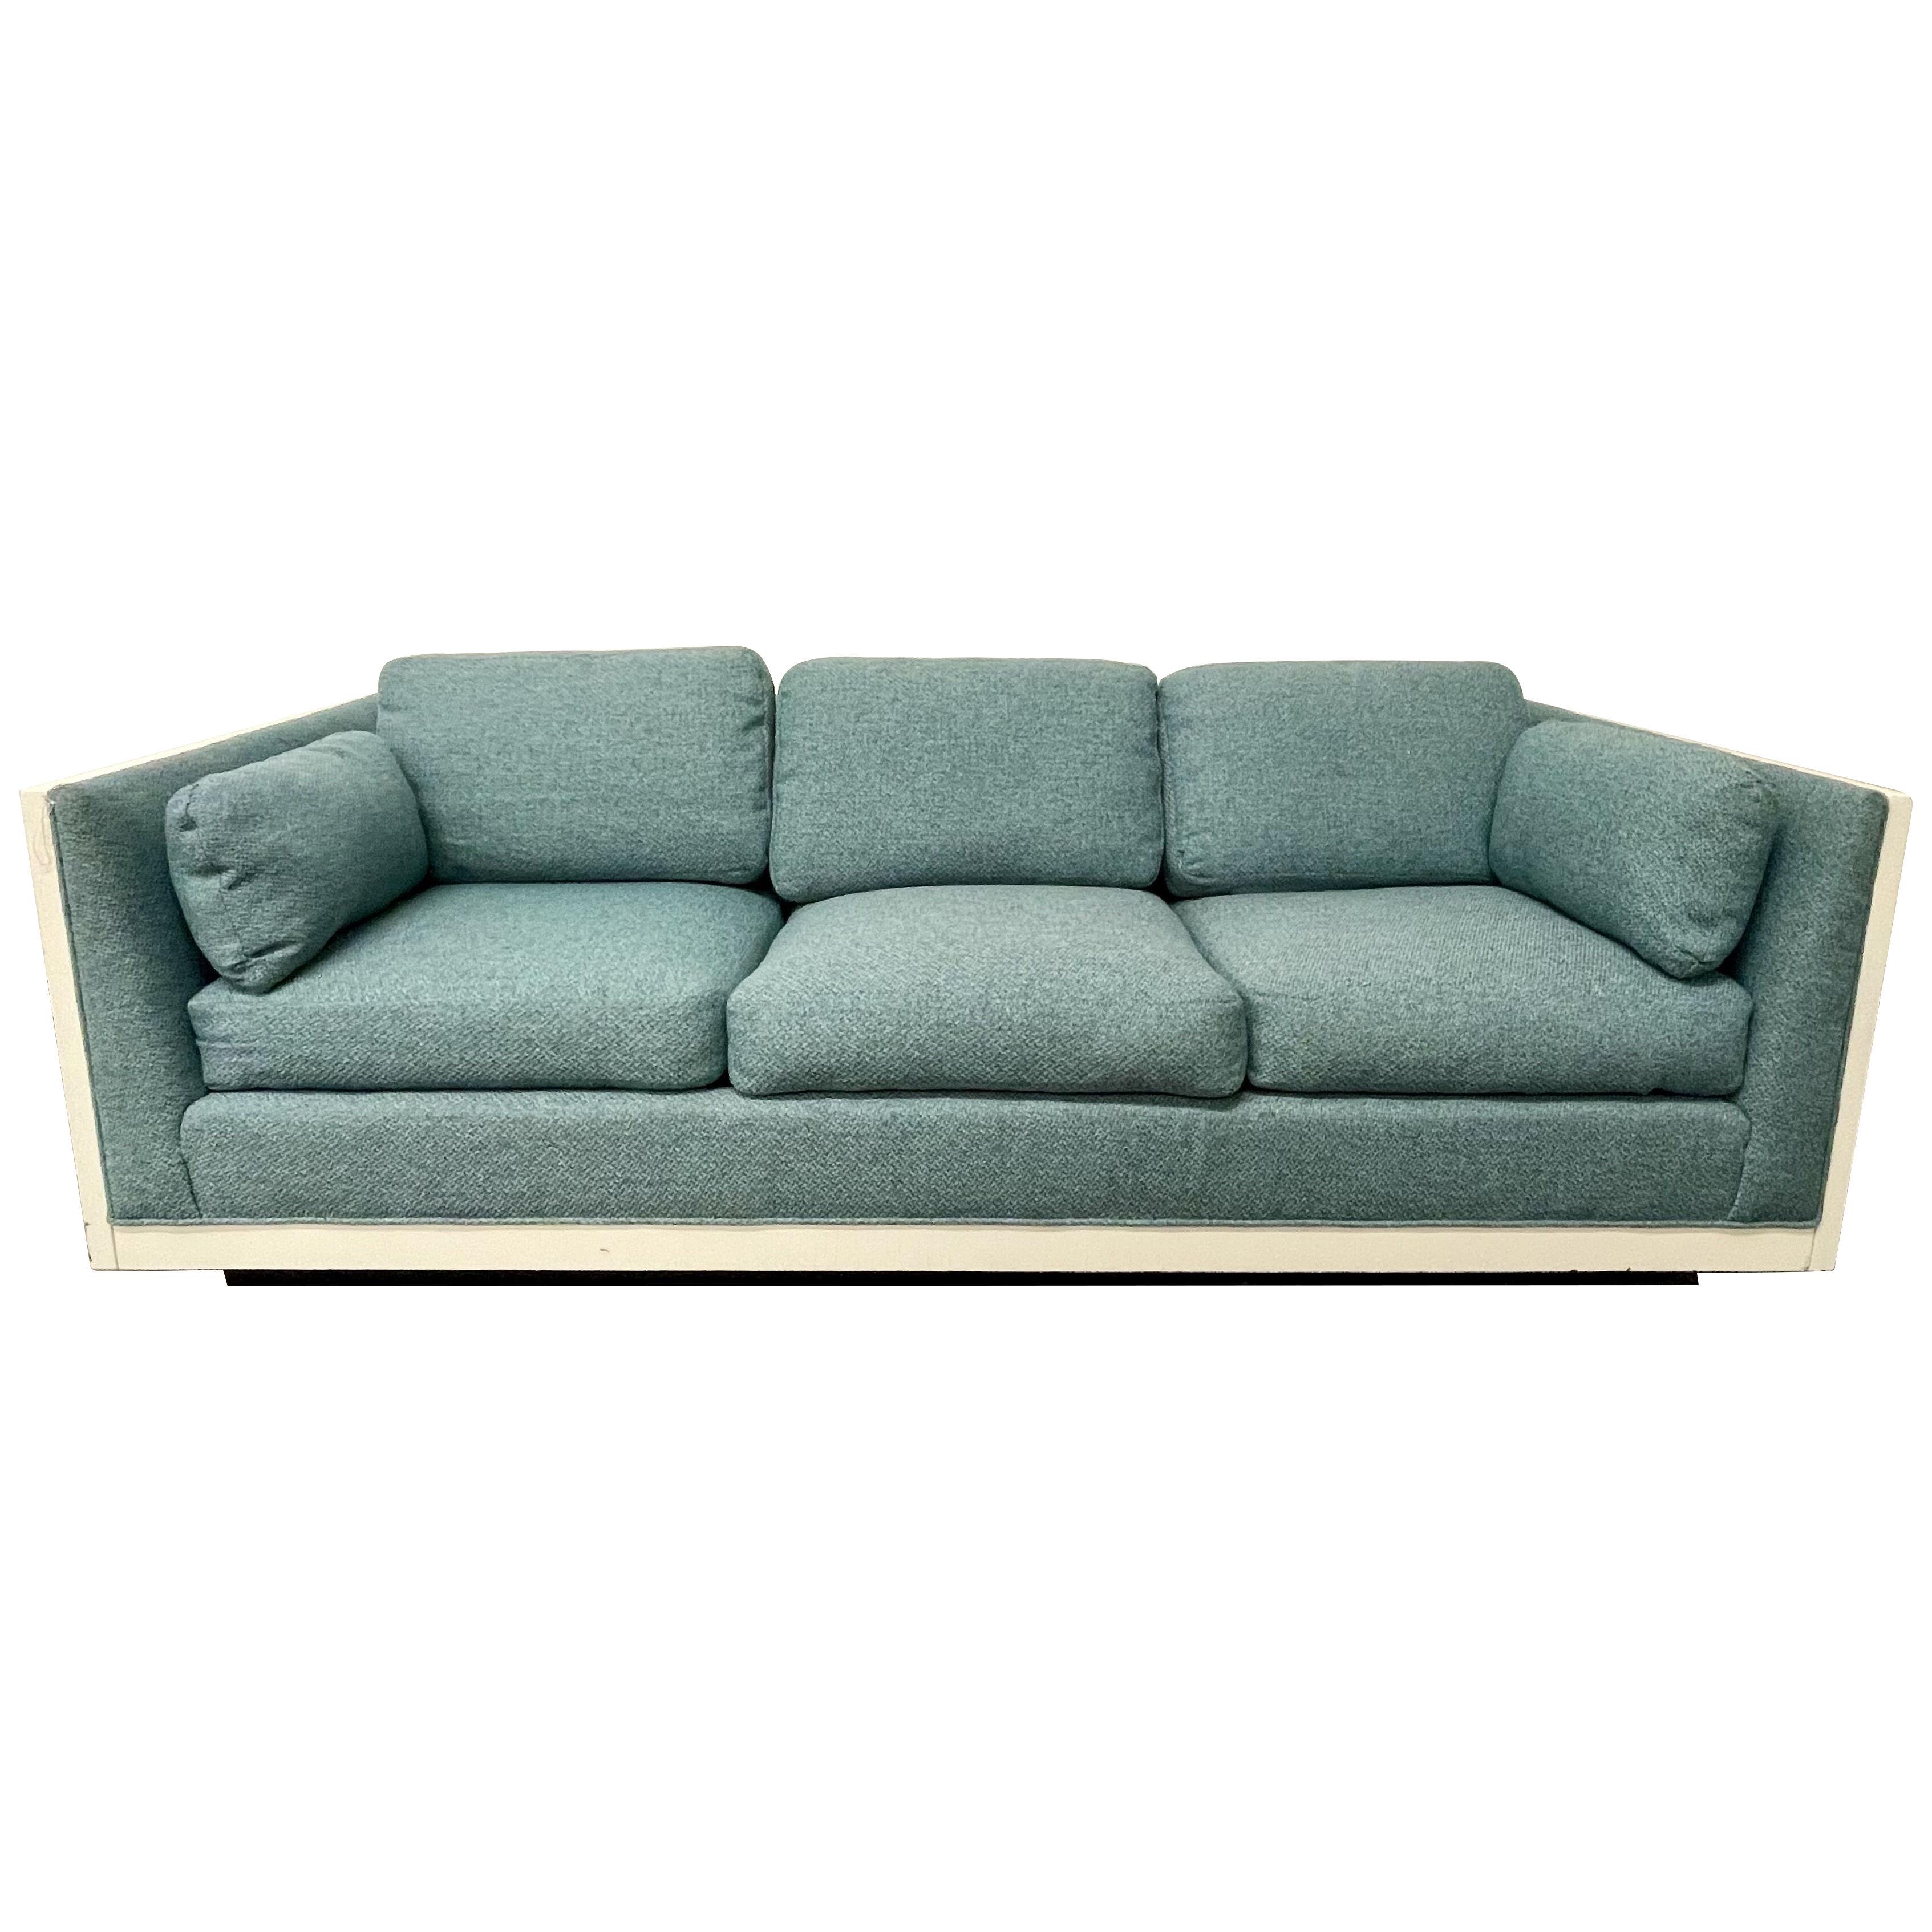 Milo Baughman Sofa, Couch, White Lacquered, Mid Century Modern